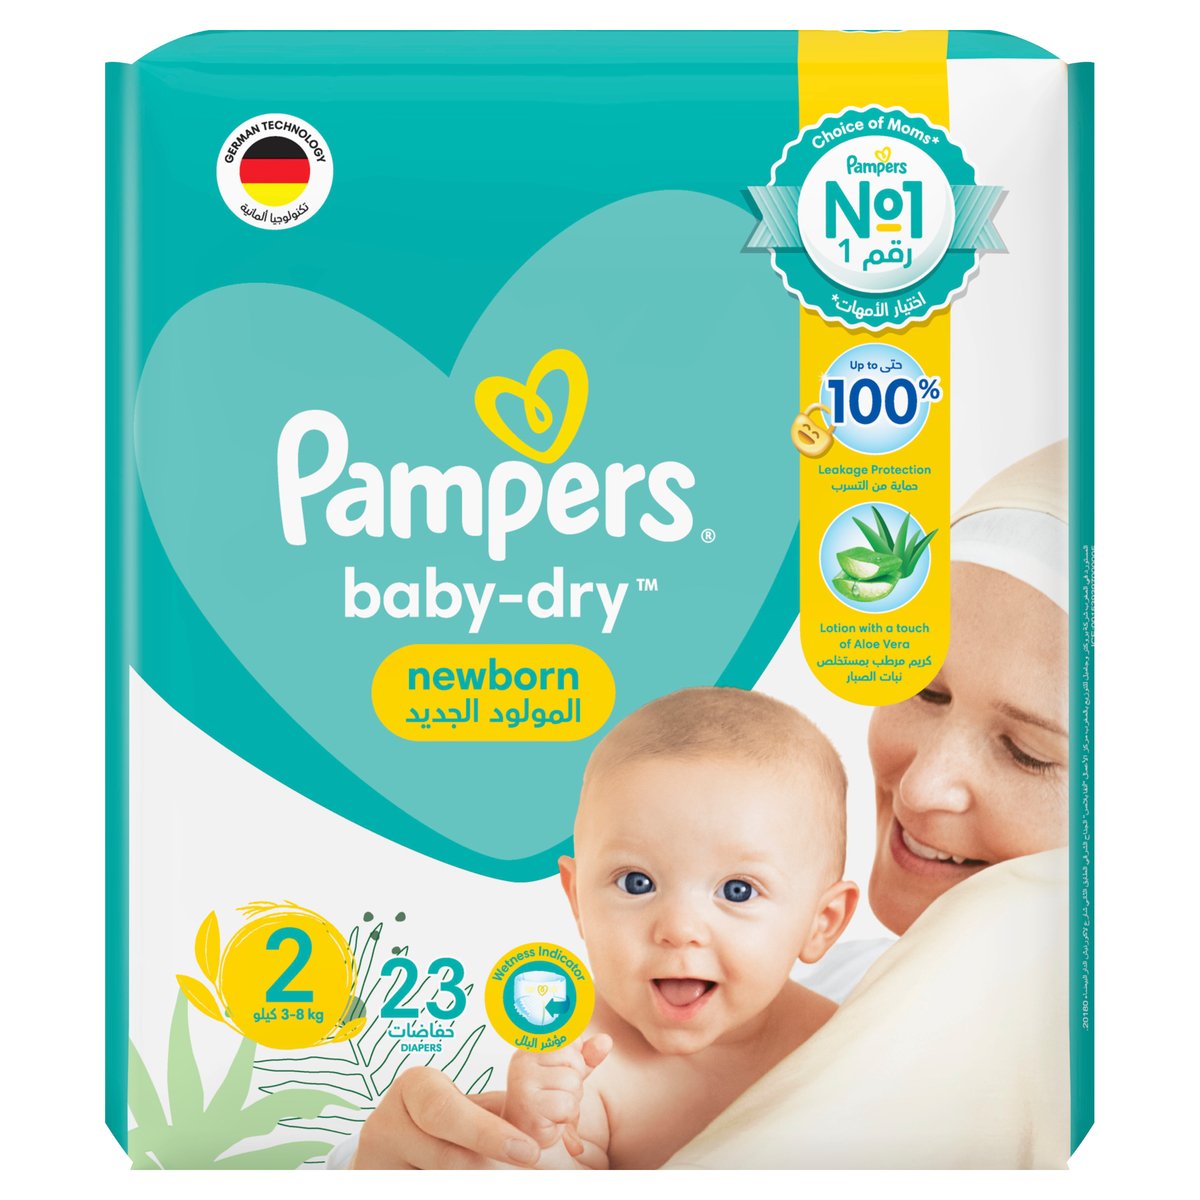 Pampers Baby-Dry Newborn Taped Diapers with Aloe Vera Lotion, up to 100% Leakage Protection, Size 2, 3-8kg, Carry Pack, 23 pcs